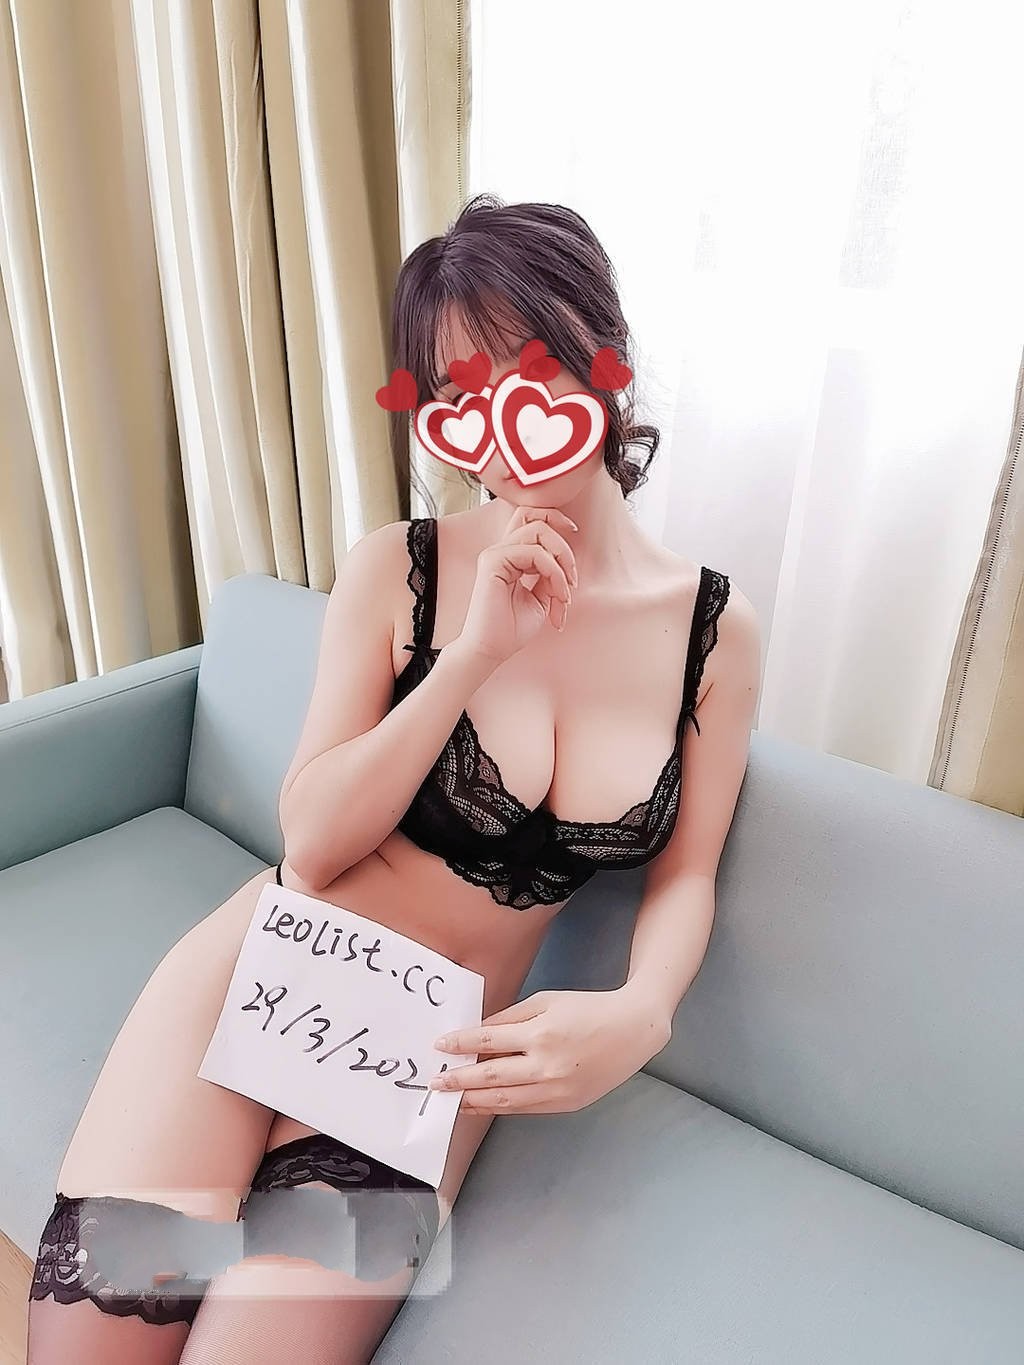 ♥♥Innocent and busty Harumi♥♥ Kiss♥♥ you♥♥ softly♥♥